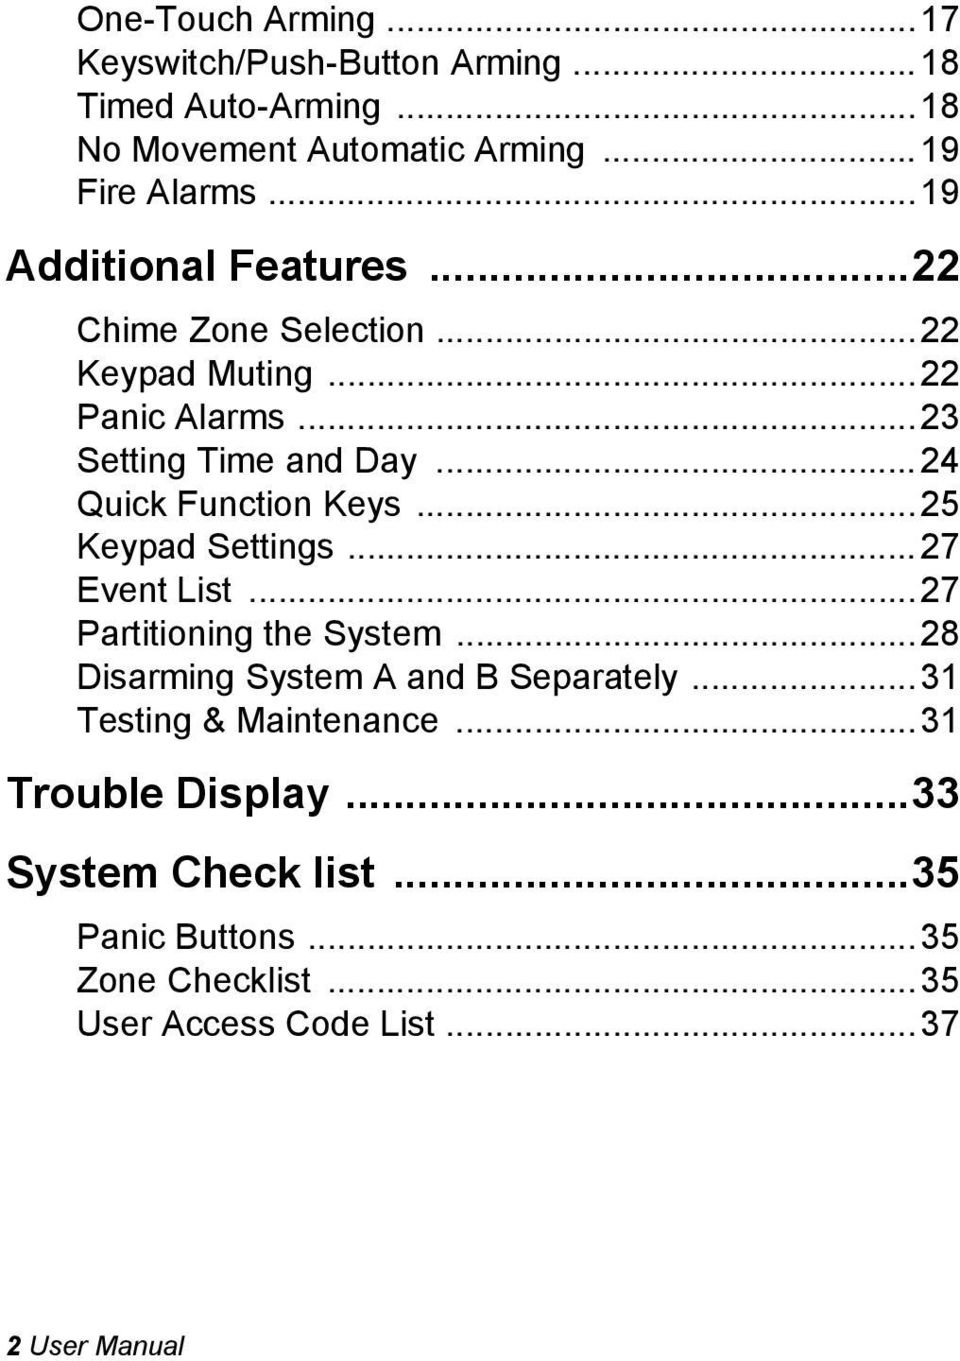 ..24 Quick Function Keys...25 Keypad Settings...27 Event List...27 Partitioning the System...28 Disarming System A and B Separately.